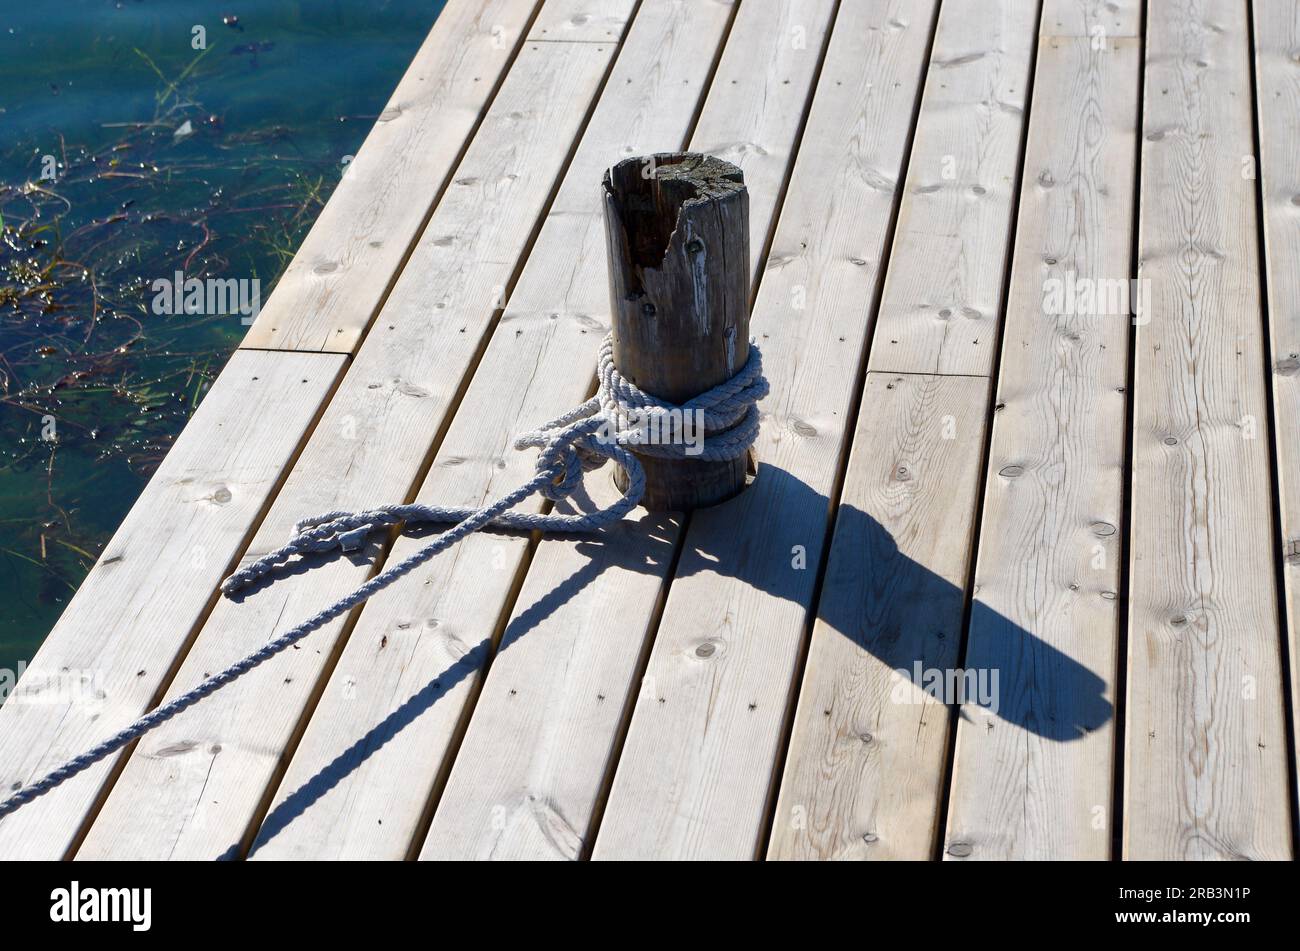 Wooden pier with a wooden pole bollard and tied ropes. Stock Photo